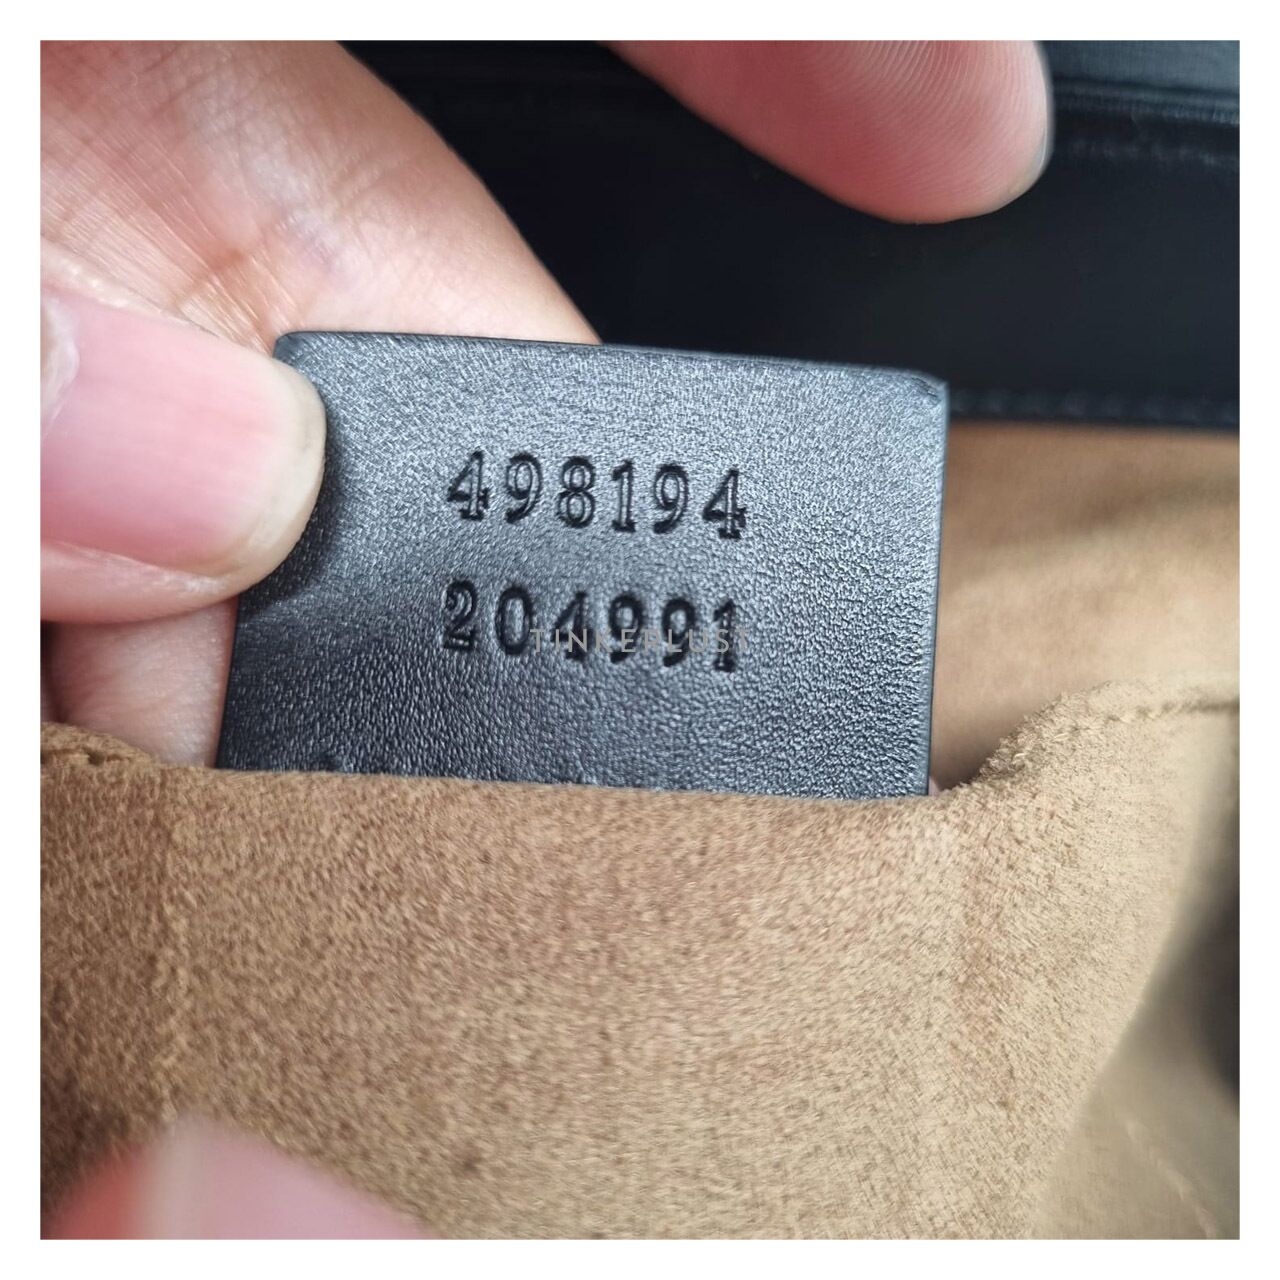 Gucci GG Supreme Canvas & Leather Padlock Backpack